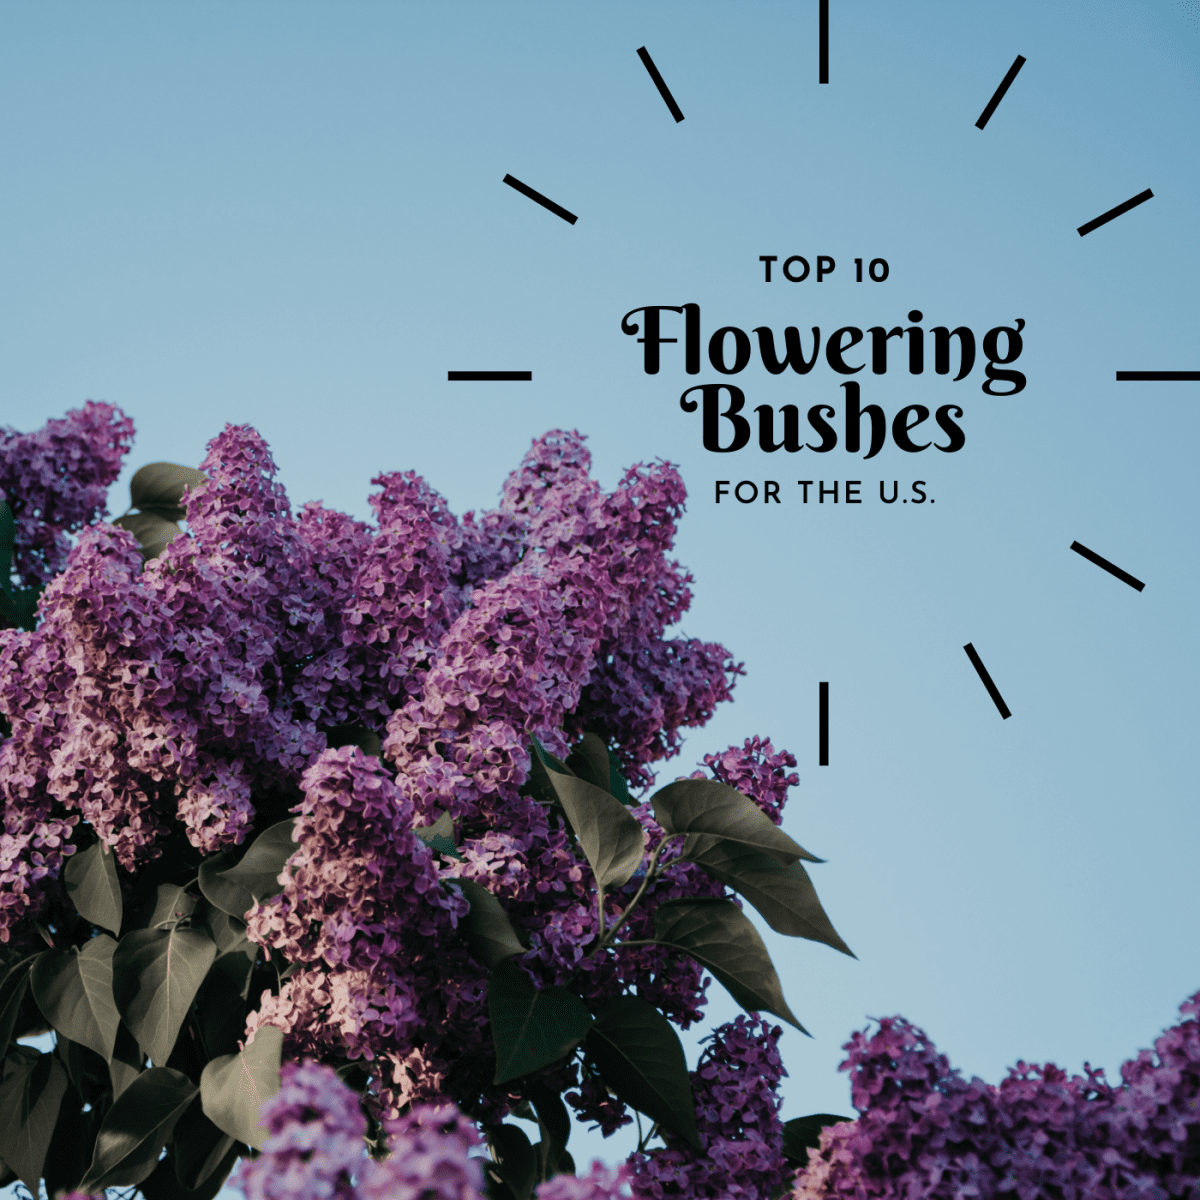 The Best Flowering Shrubs and Bushes for the Eastern and Western ...